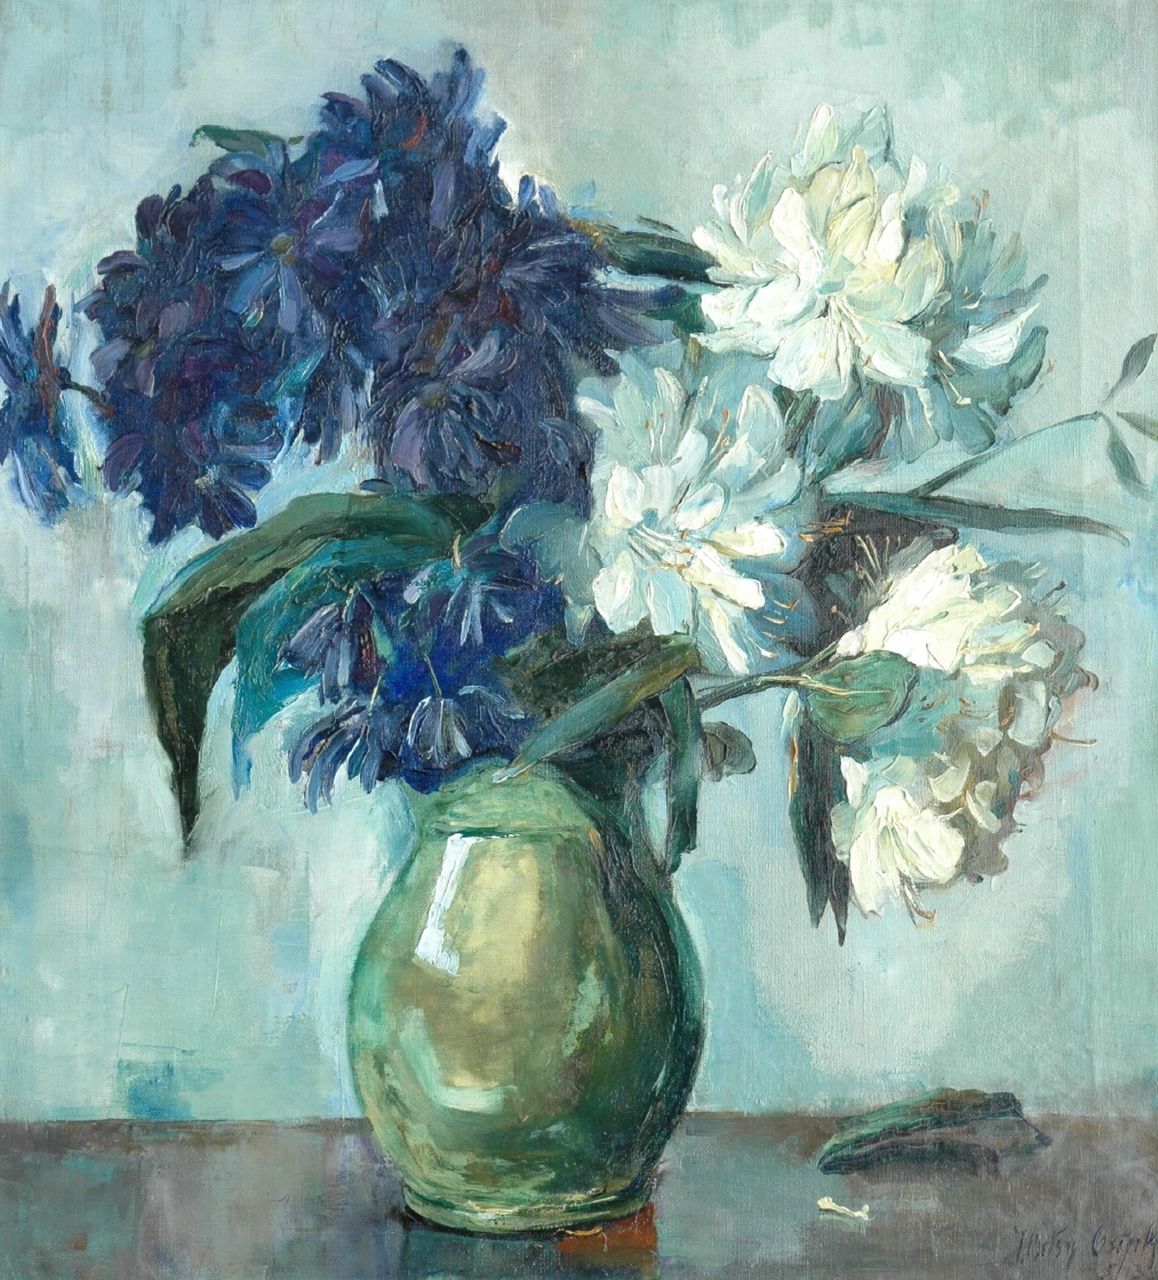 Westendorp-Osieck J.E.  | Johanna Elisabeth 'Betsy' Westendorp-Osieck, Rhododendron branches in a vase, oil on canvas 60.4 x 54.4 cm, signed l.r. and painted 5/13